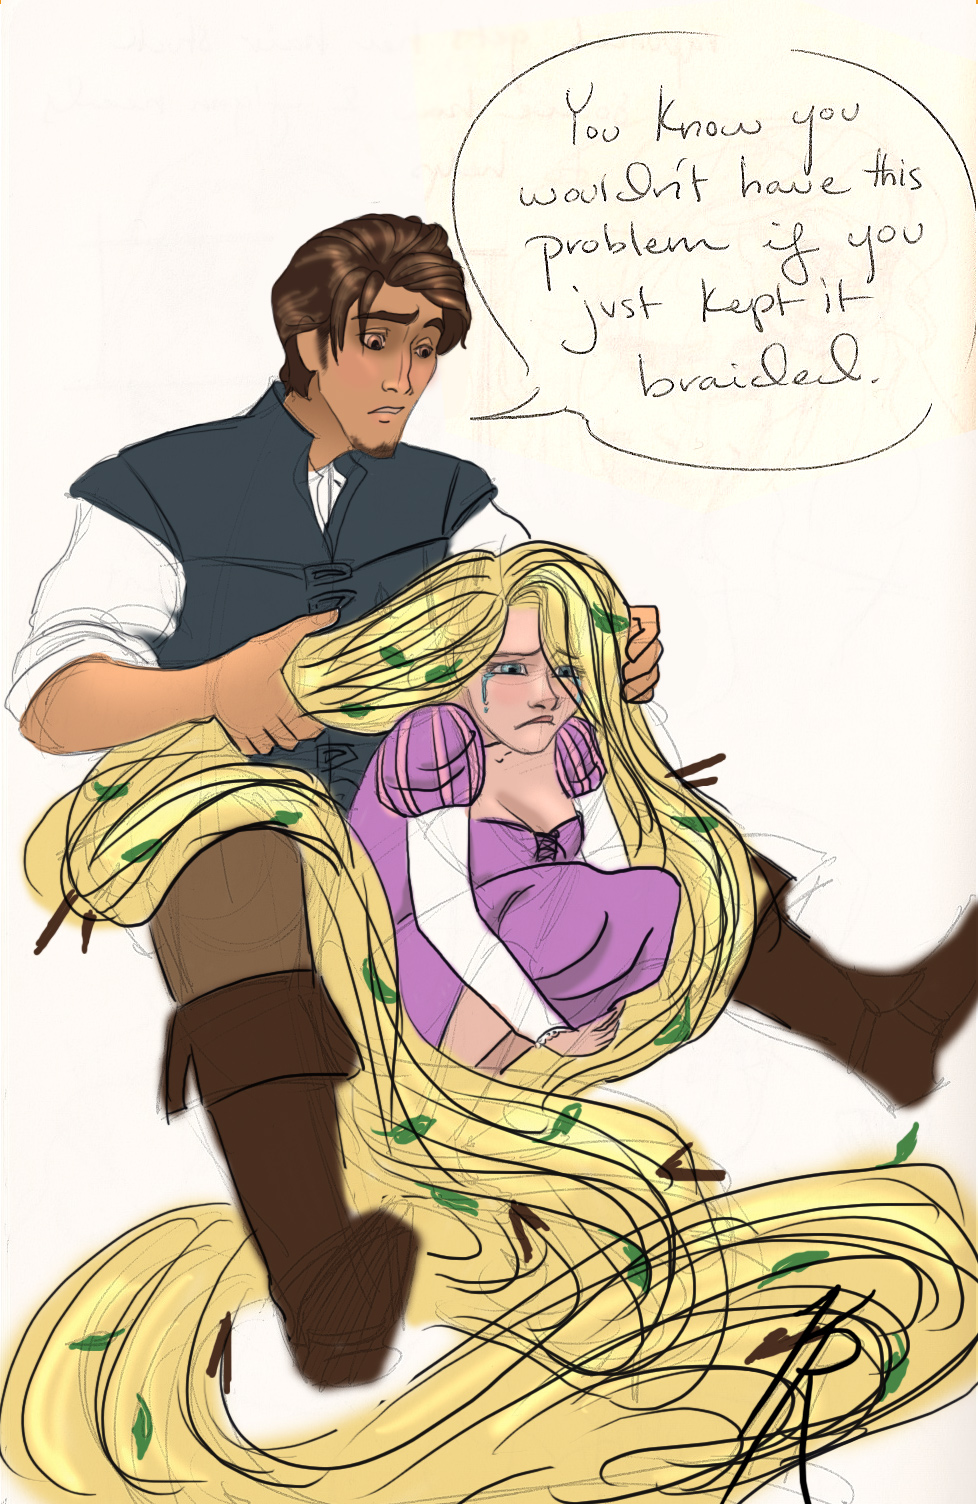 Really Tangled; You know you wouldn't have this problem if just kept it  braided - Disney Princess Fan Art (28538951) - Fanpop